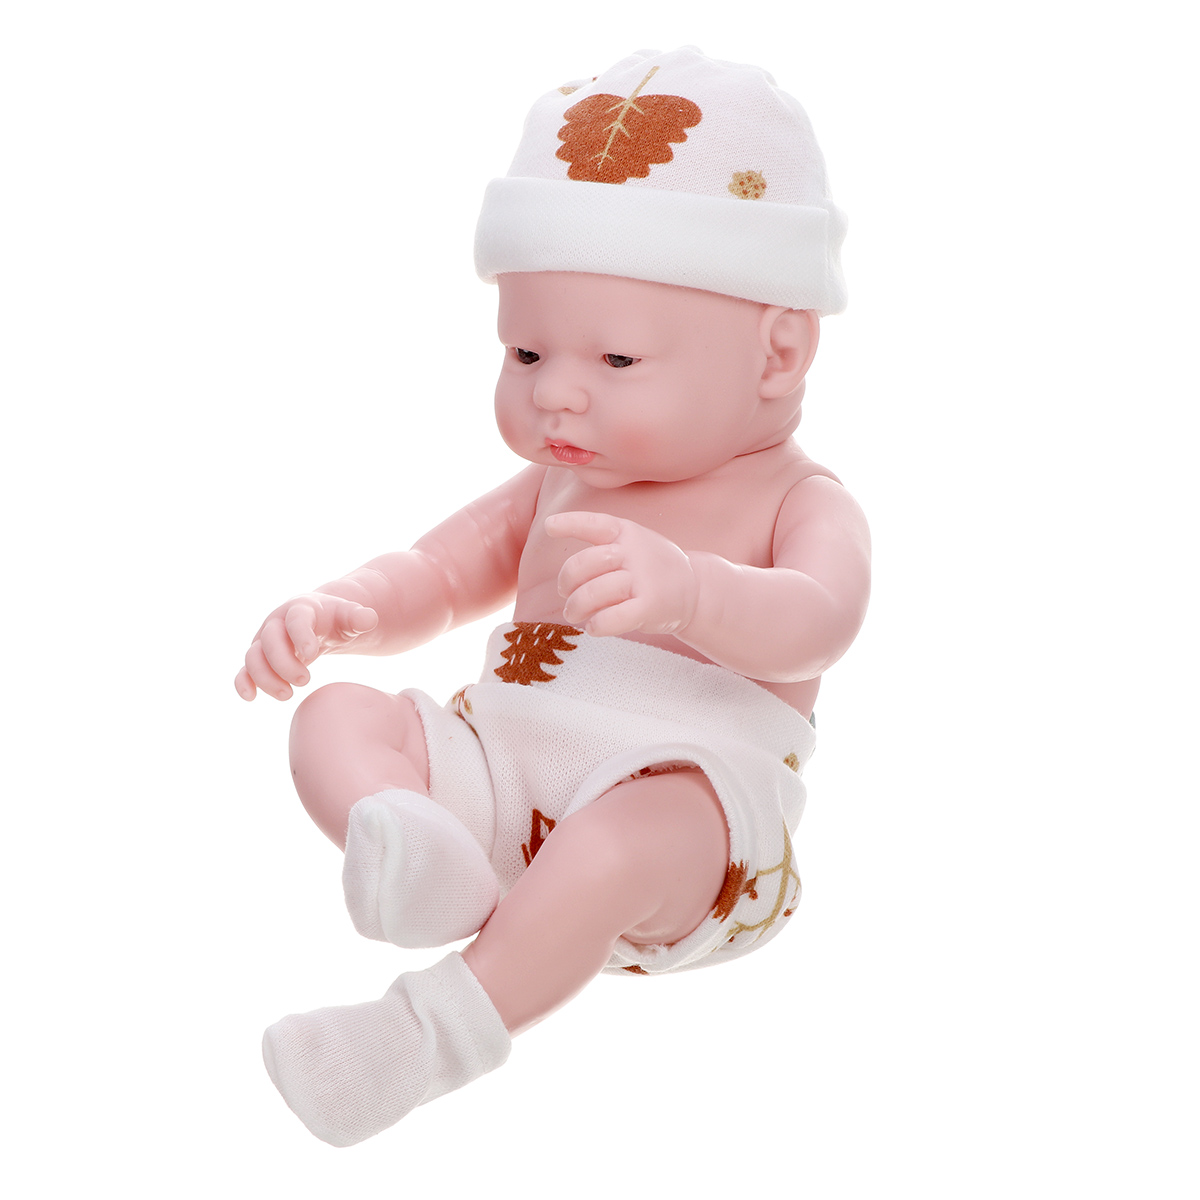 9.5inch Baby Doll Real Life Soft Silicone Doll Baby Girl Realistic Handmade Baby Doll Toy